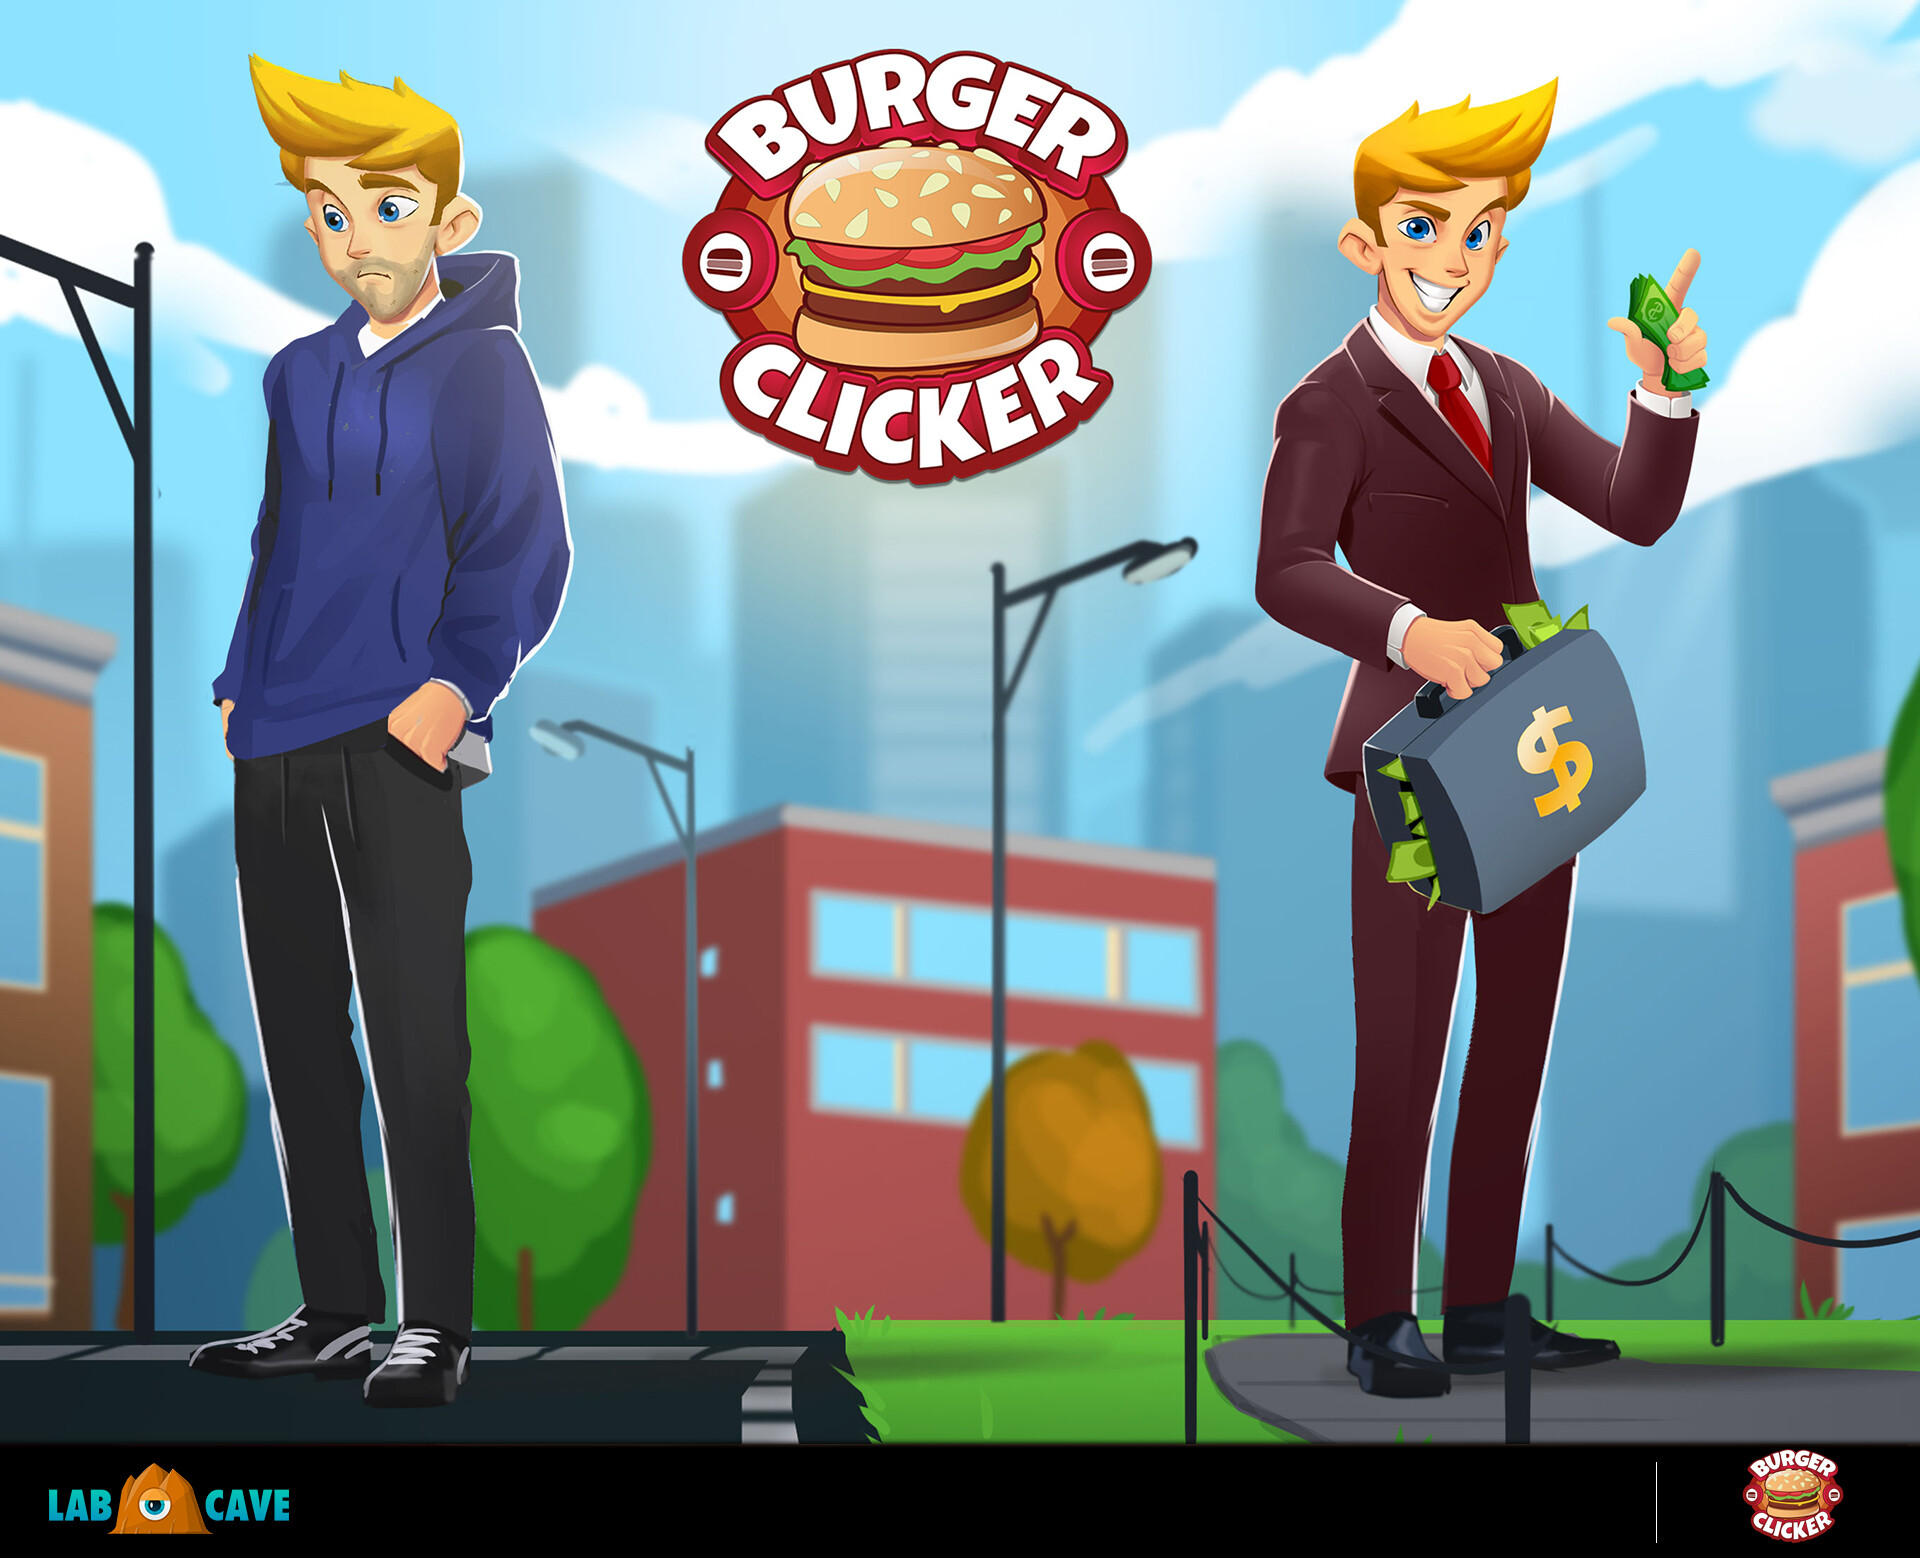 Play Burger Clicker  Free Online Games. KidzSearch.com